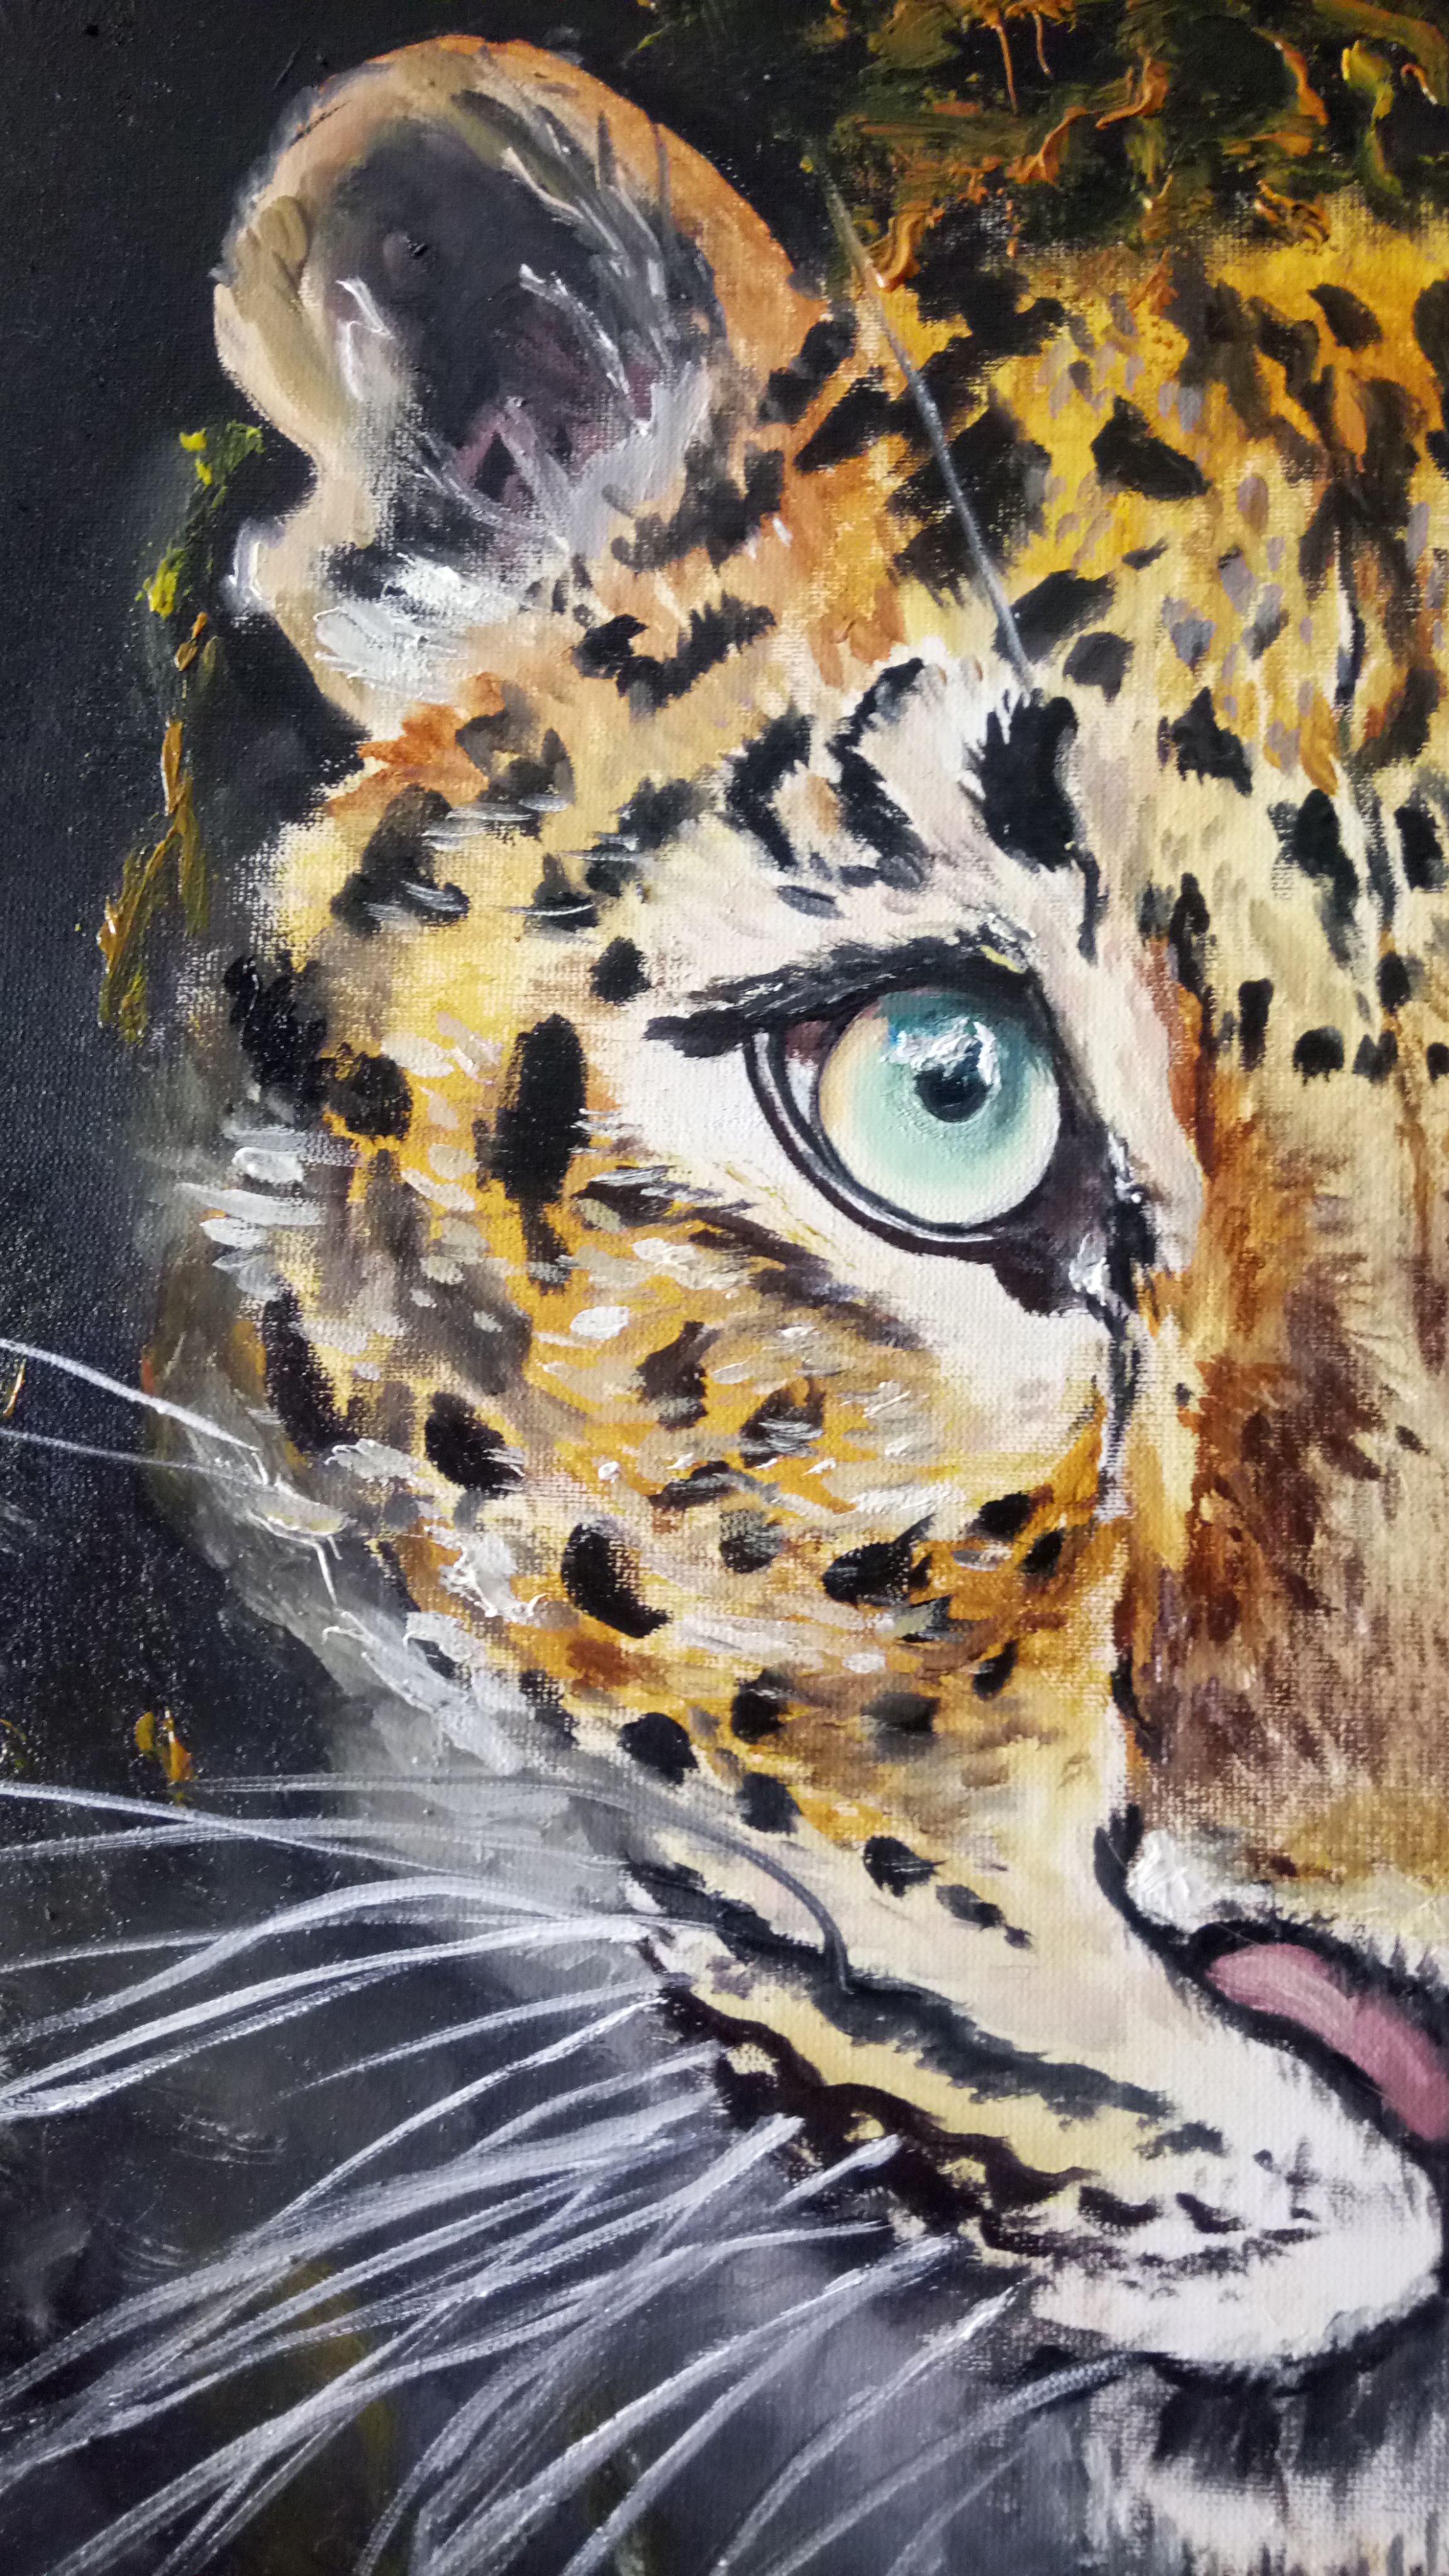 Portrait of one of the most beautiful wild cats - a leopard. He is depicted on a dark background, entering the white space, as if through a door. This enhances the effect of realism.  Animal, leopard, tiger, wildlife, jungle.    This original